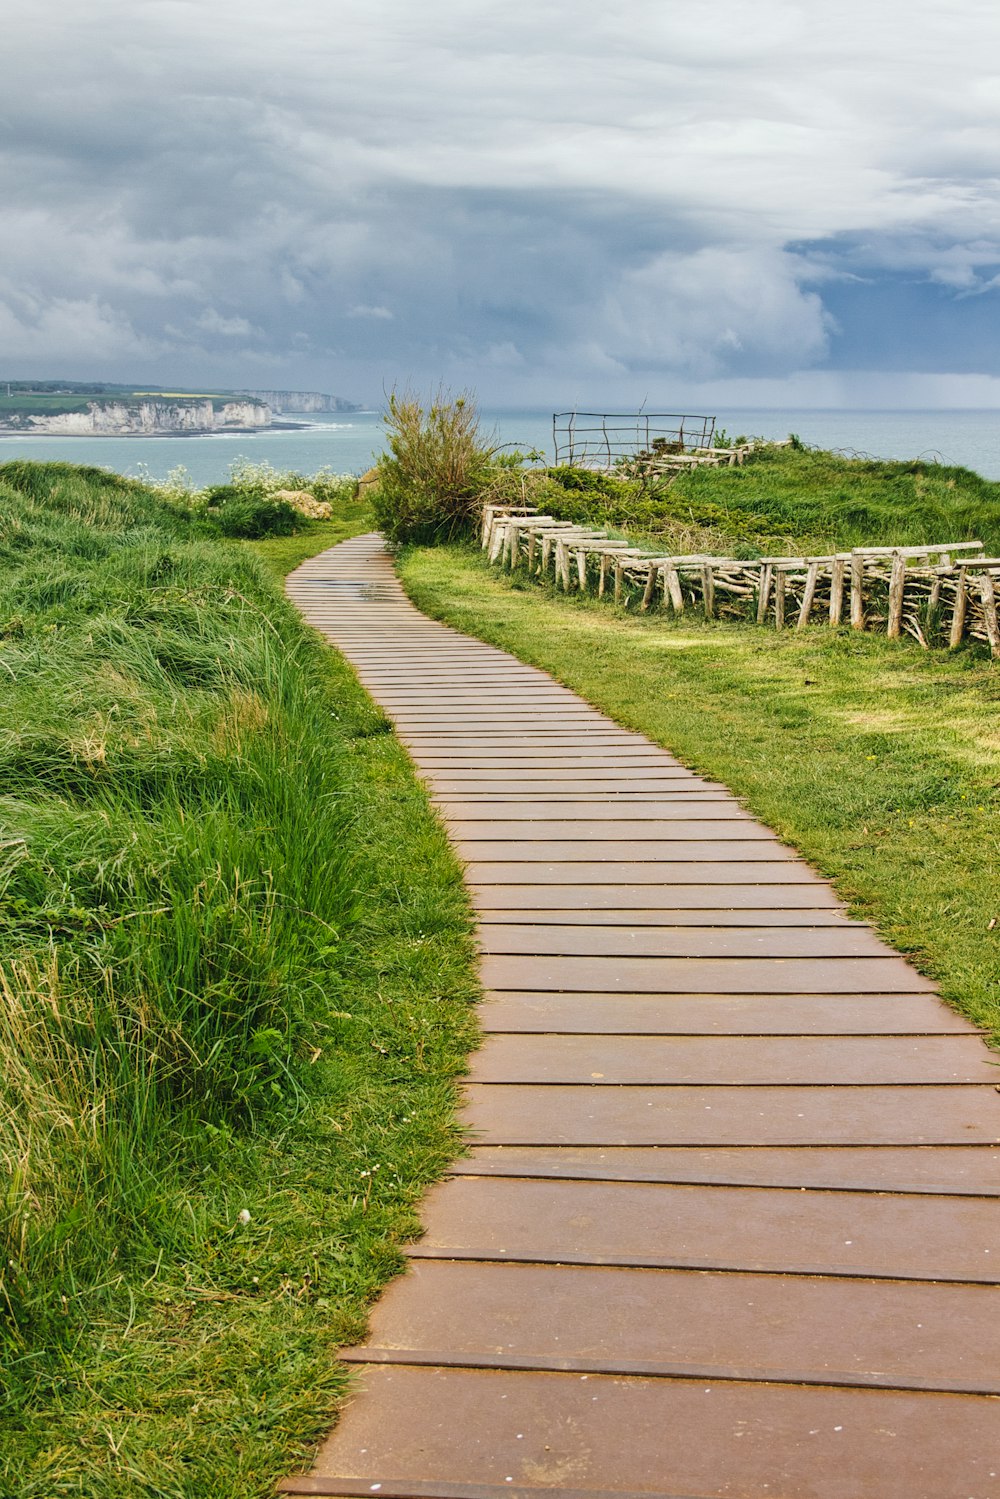 brown wooden pathway between green grass field near body of water during daytime